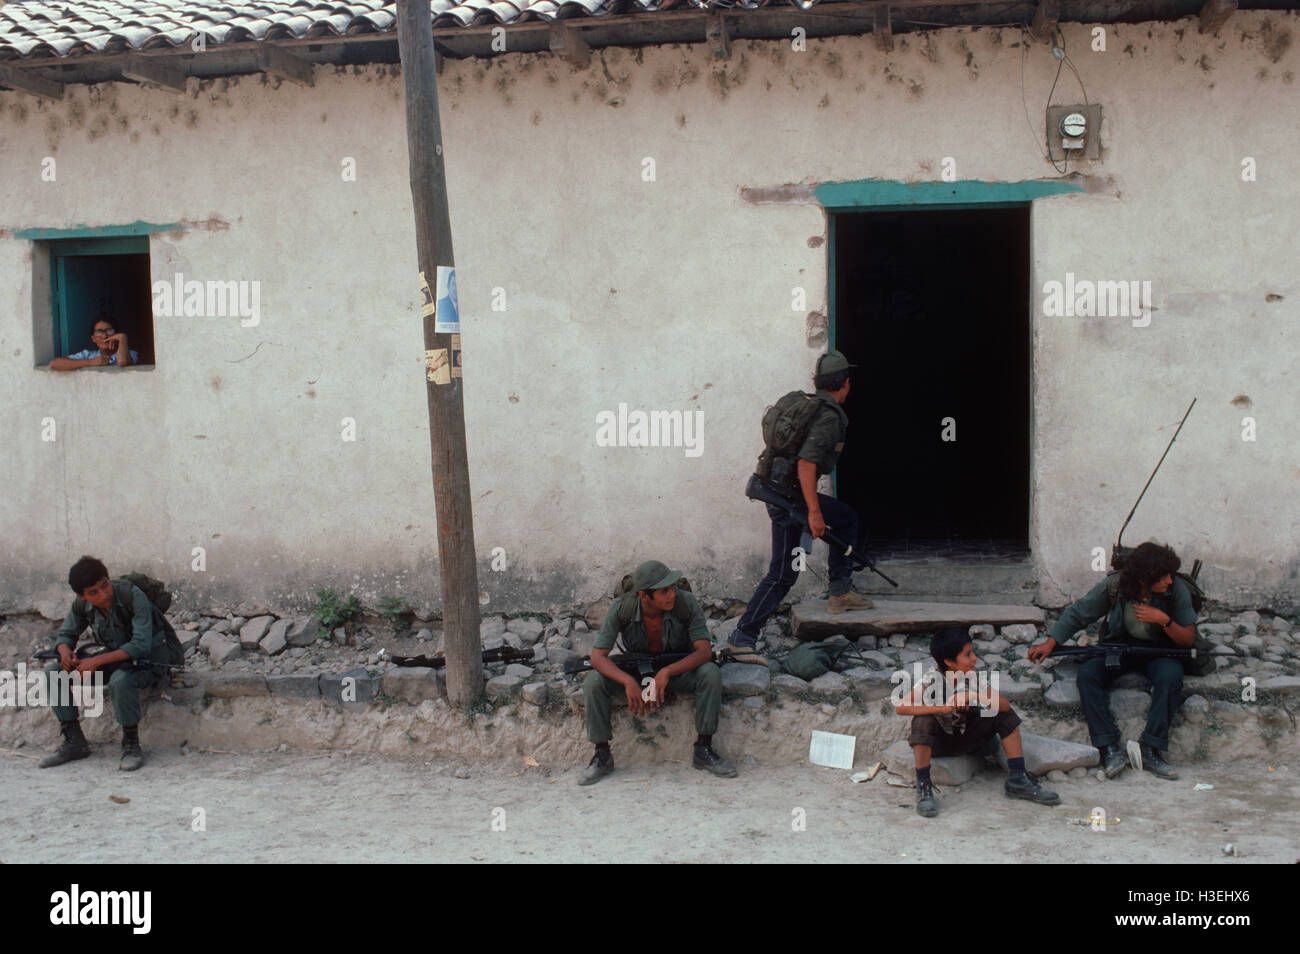 TENANCINGO,  EL SALVADOR, MARCH 1984: - Within the FPL Guerrilla's Zones of Control.  Guerrilla fighter outside a shop that still functions in the partly ruined town of Tenancingo. Stock Photo